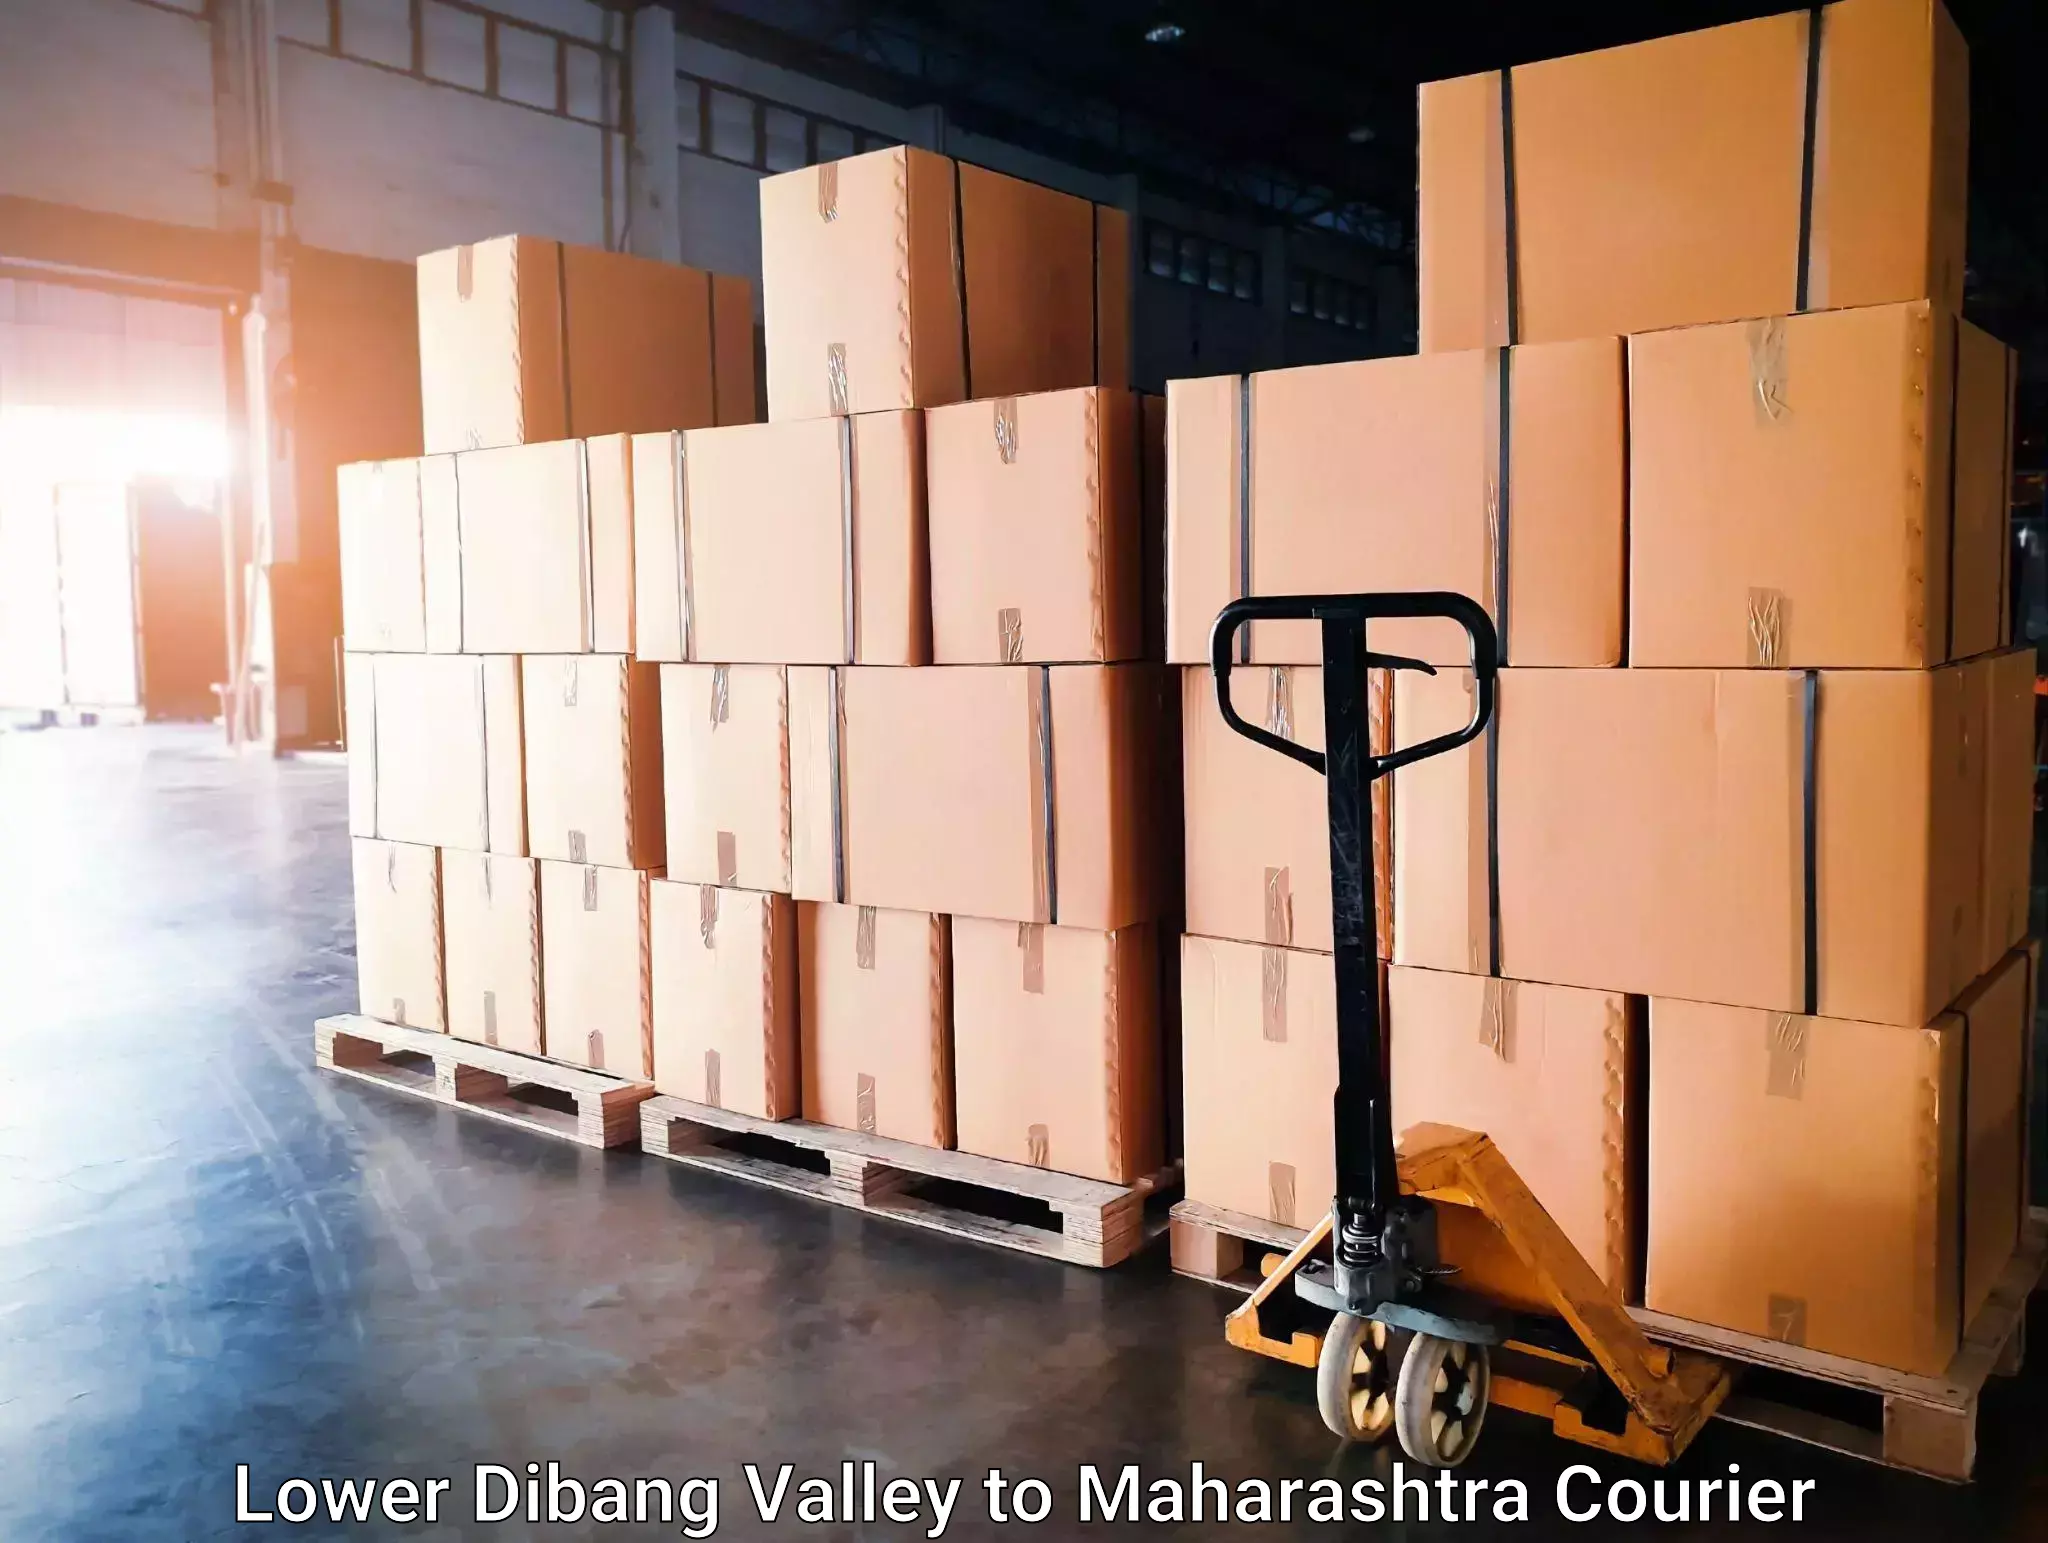 Courier service comparison Lower Dibang Valley to Kalyan